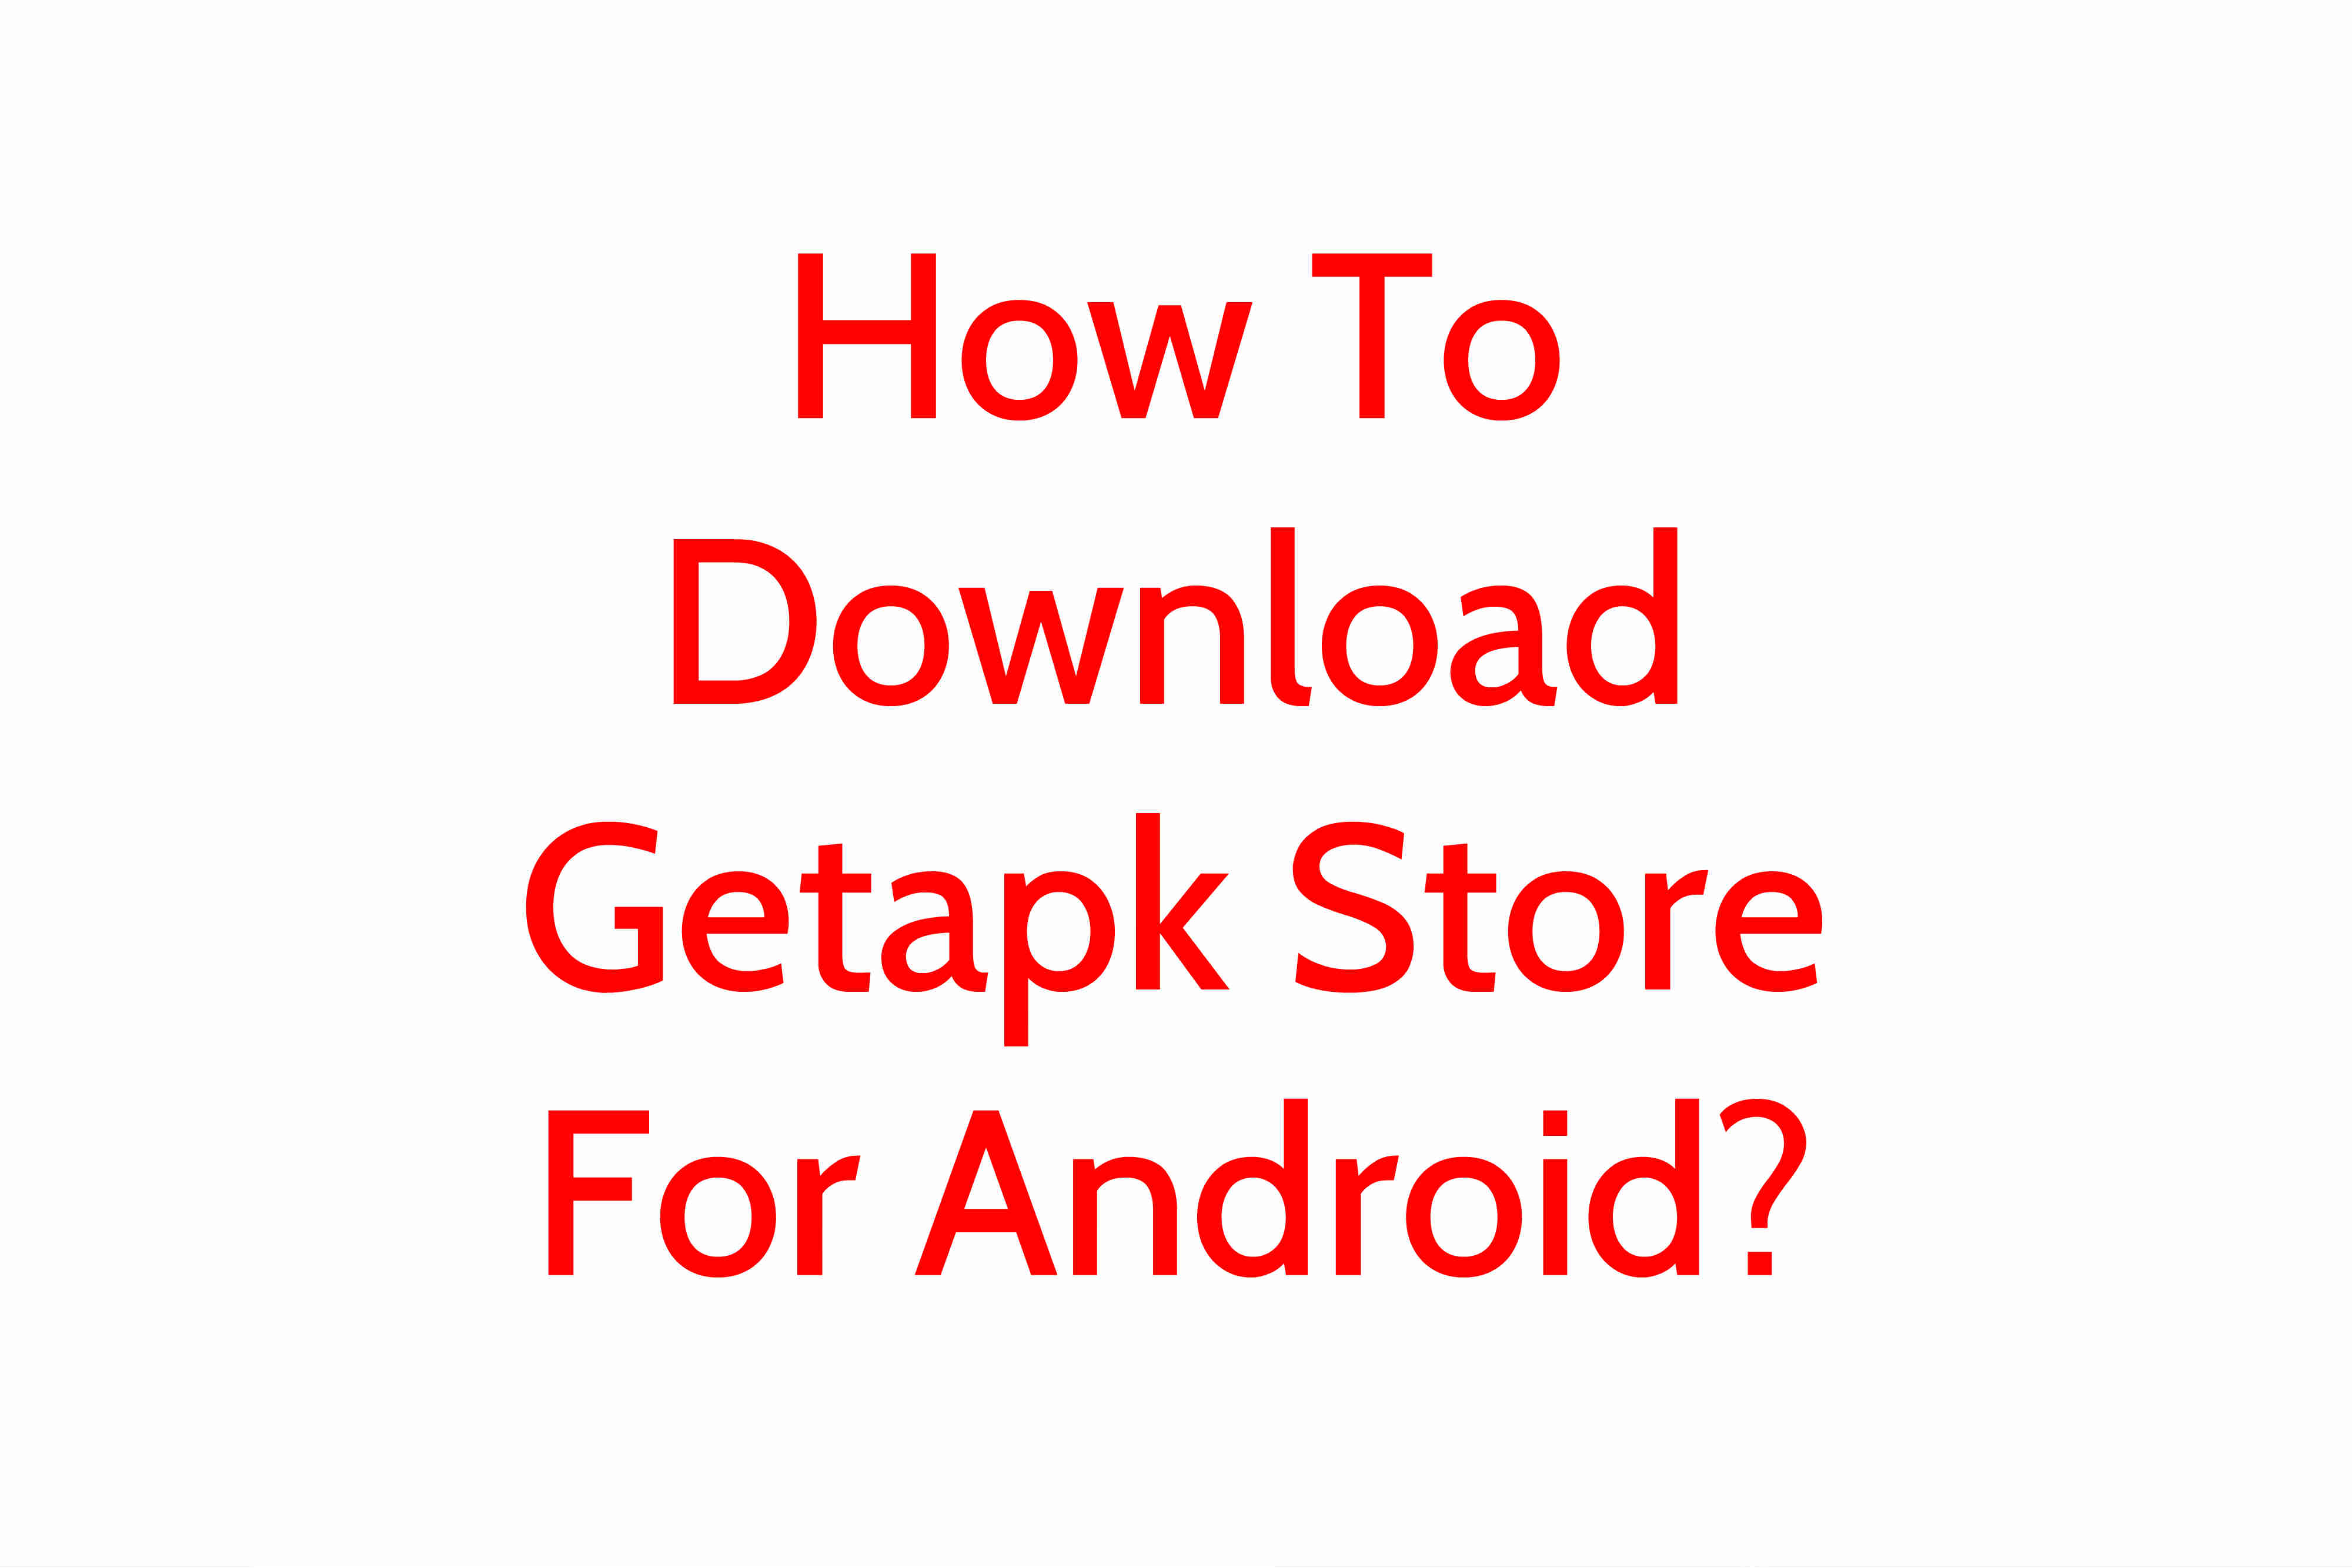 How To Download Getapk Store For Android